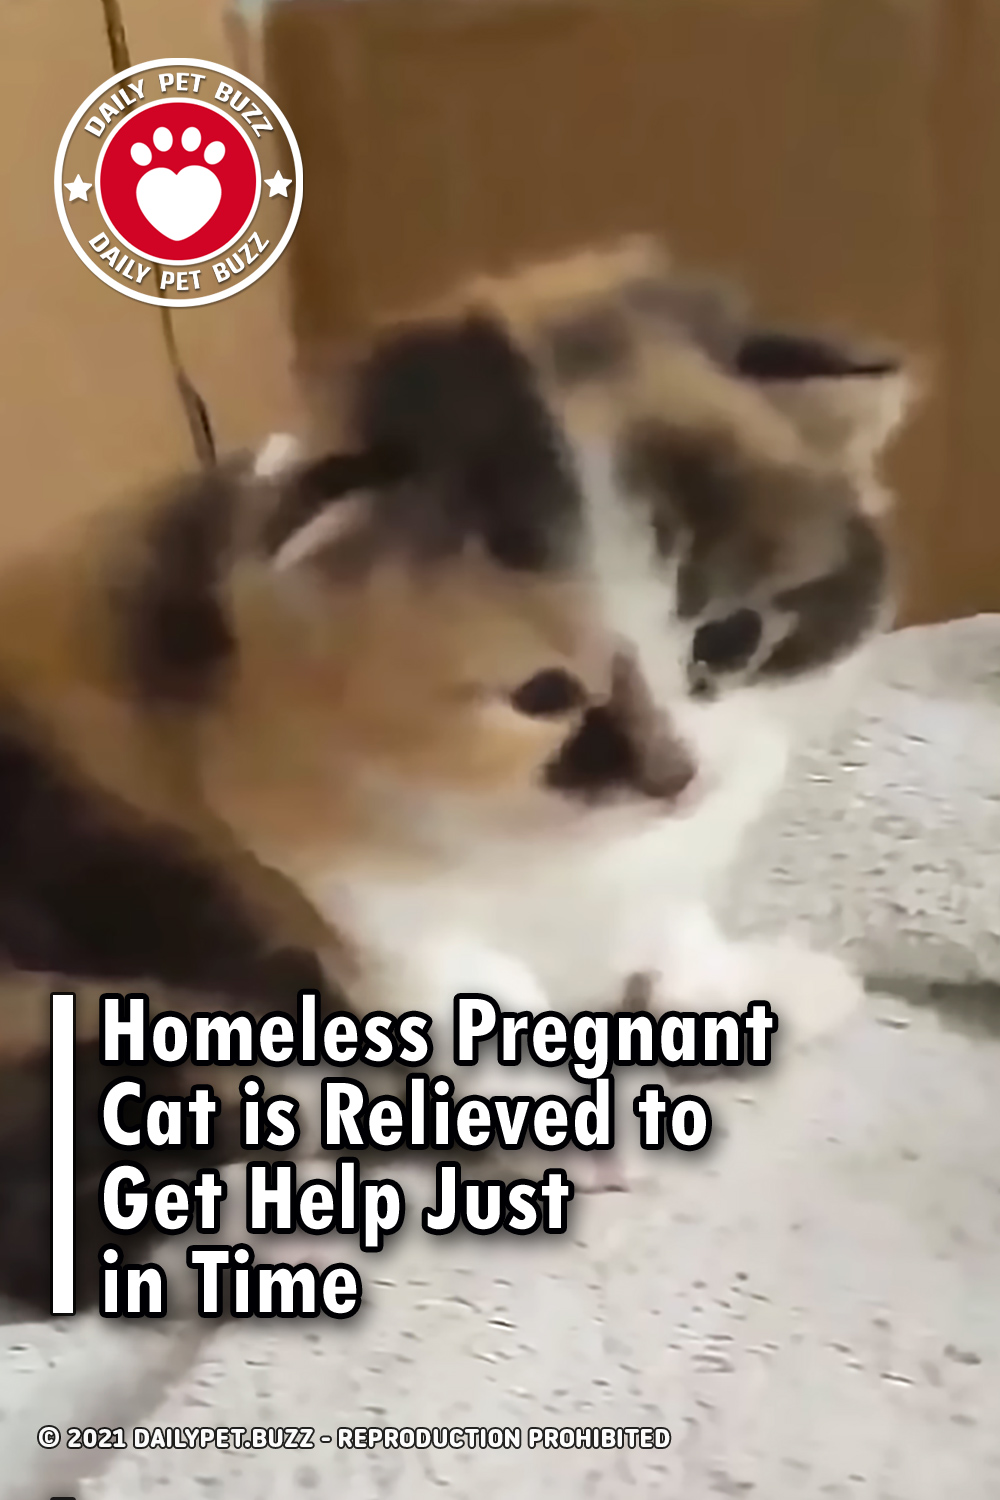 Homeless Pregnant Cat is Relieved to Get Help Just in Time